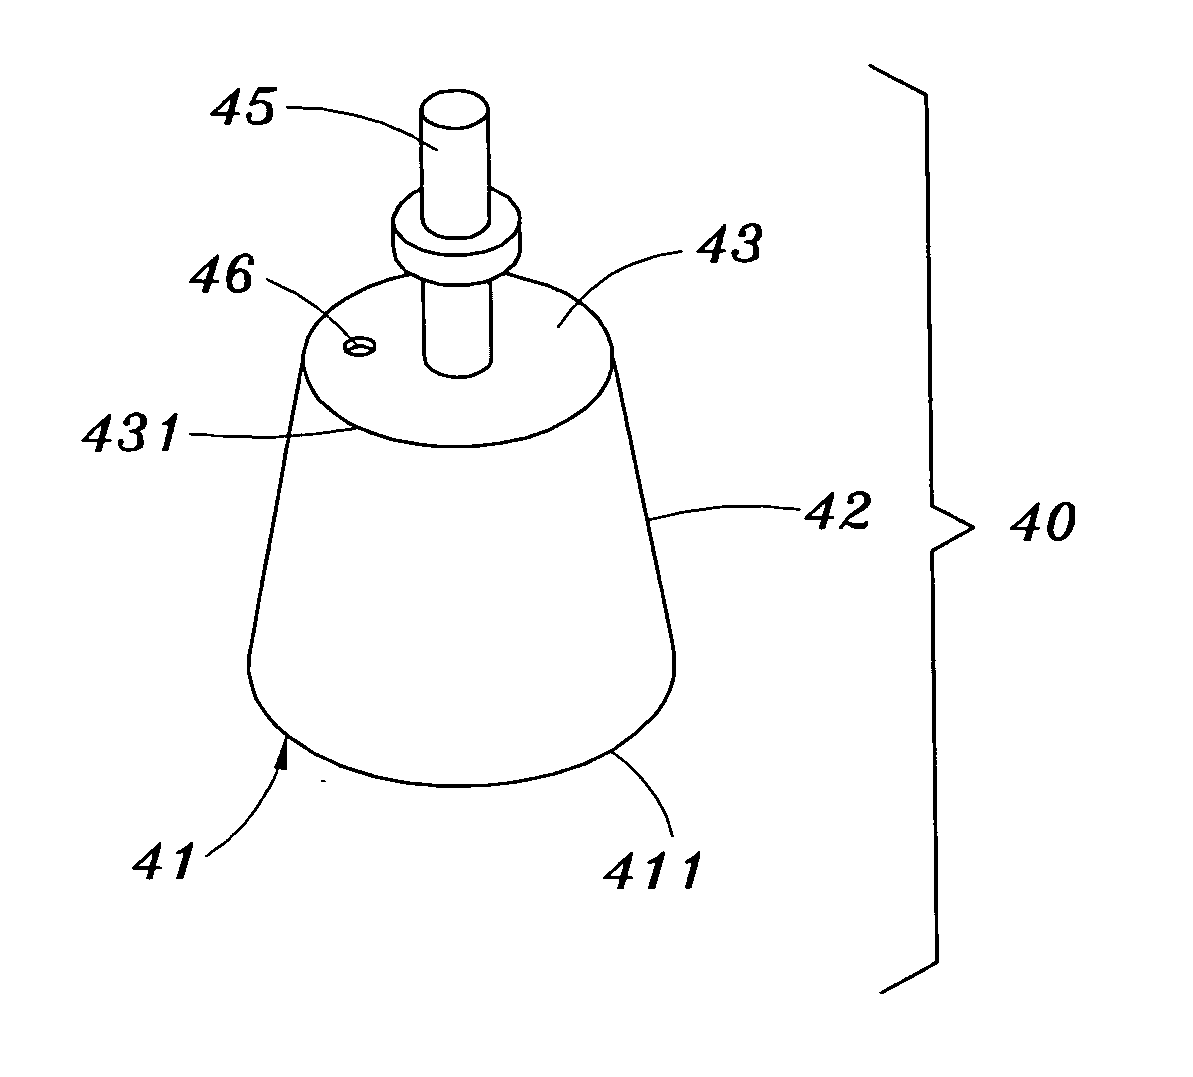 Method of mounting removable restoration tooth by using a standardized set of inner crown units, outer crown units, and device units for conforming abutment